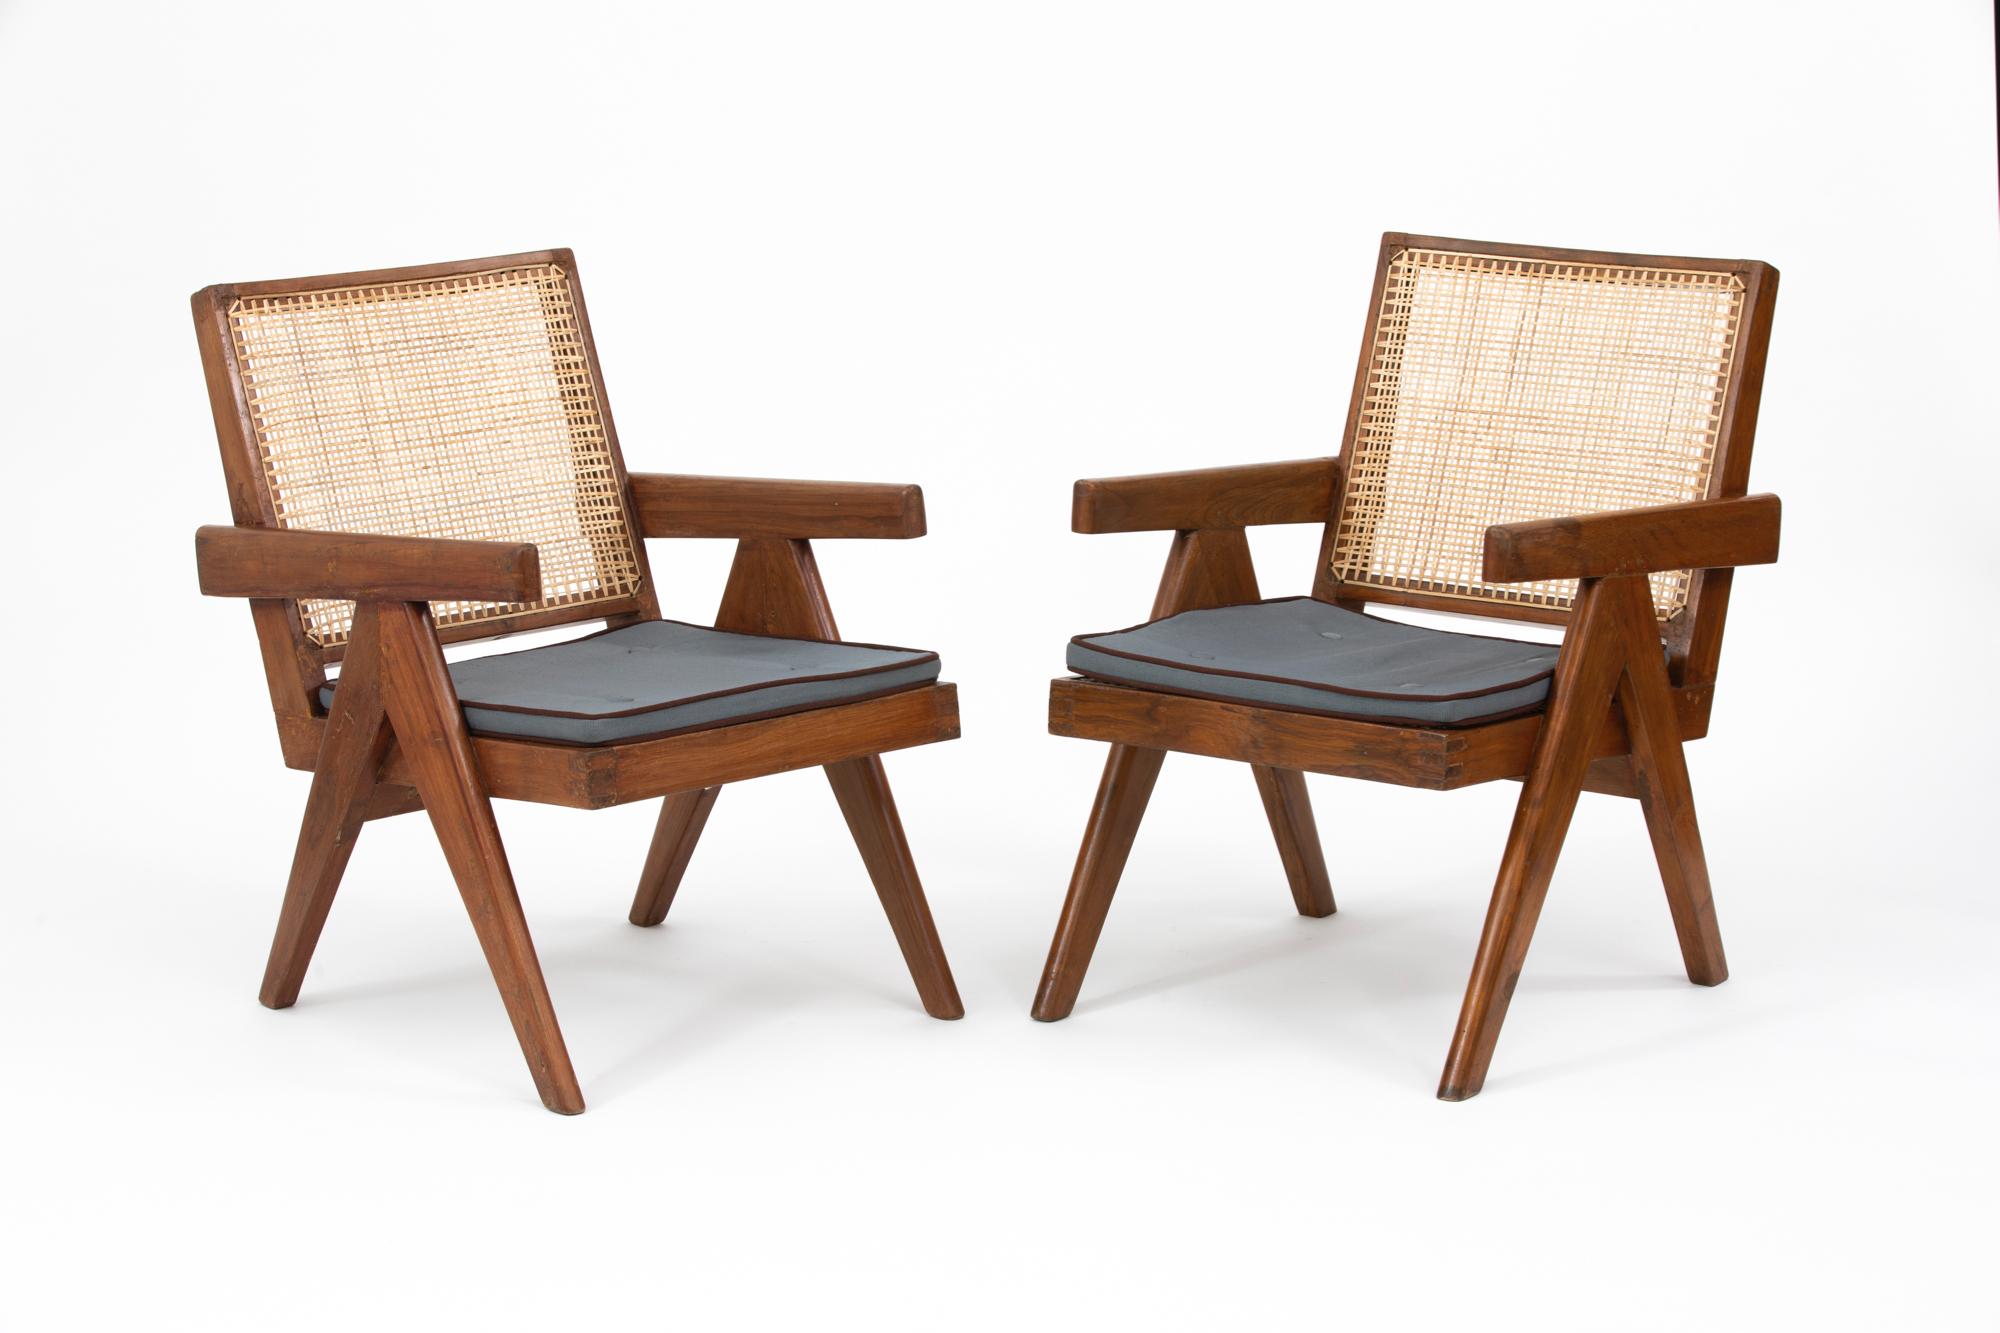 Original teak and wicker low lounge chairs with cushion, designed by Pierre Jeanneret for the famous modernist capital city of Chandigarh, India that was designed by Le Corbusier, Jeanneret and their team. Referenced in 